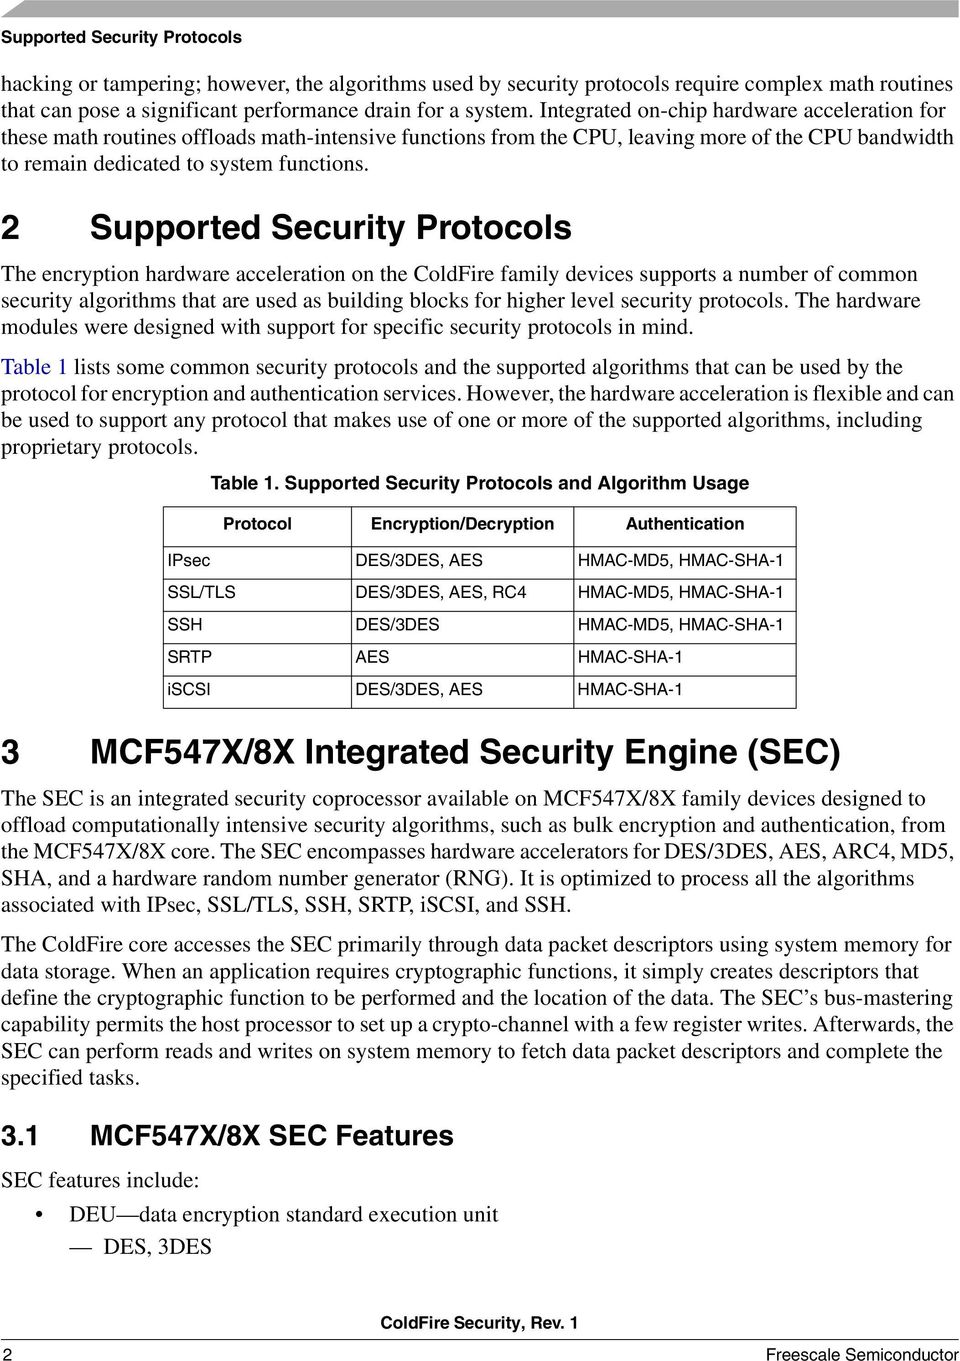 2 Supported Security Protocols The encryption hardware acceleration on the ColdFire family devices supports a number of common security algorithms that are used as building blocks for higher level